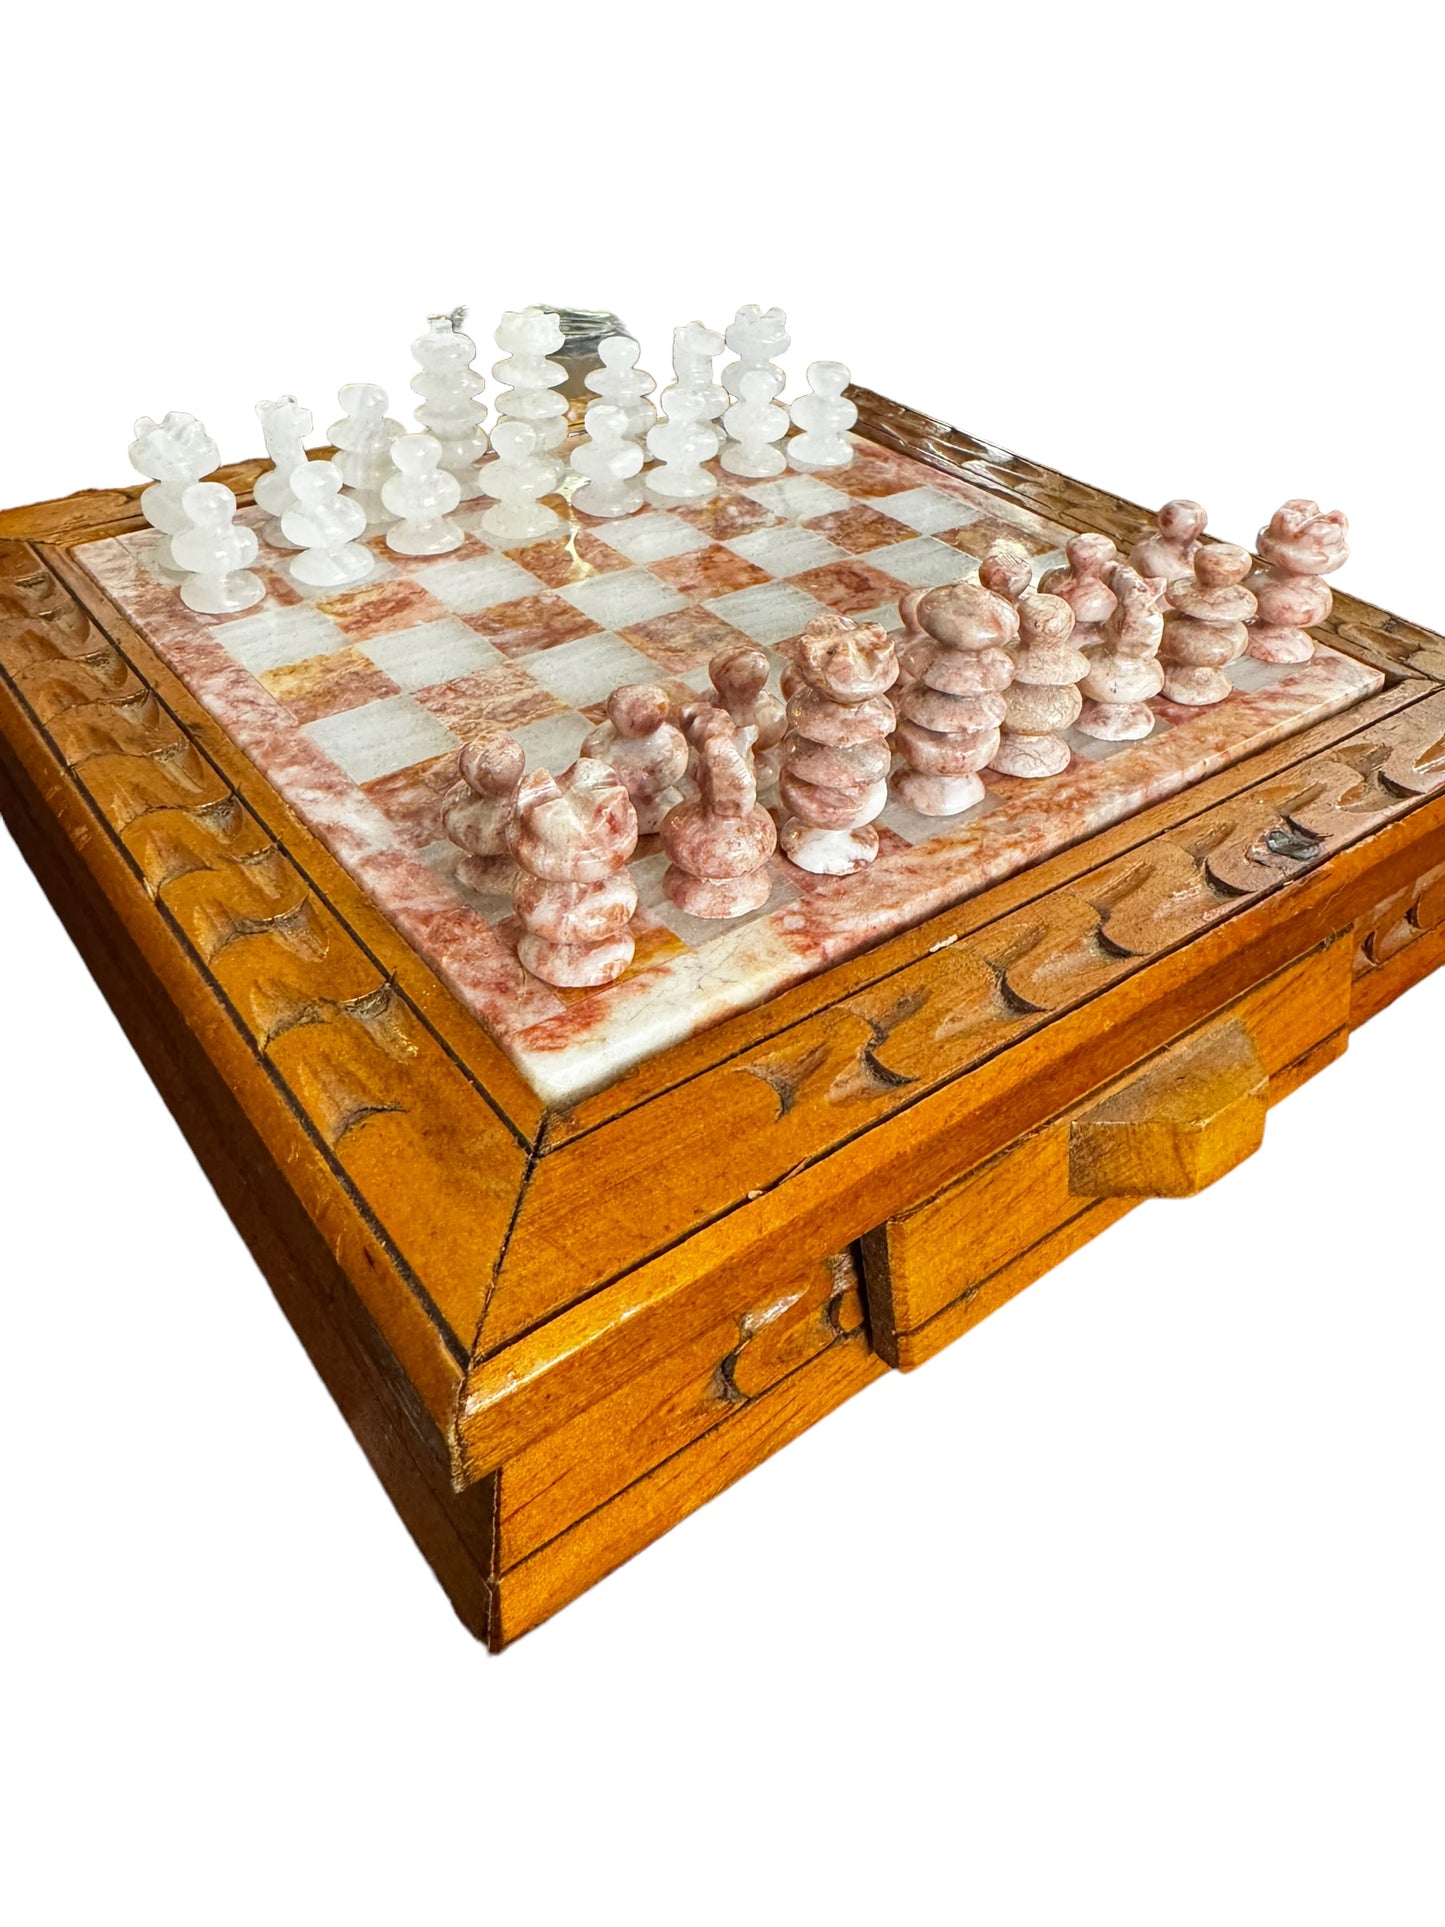 Vintage Marble And Wood Chess Set with Marble Carved Pieces -Complete-